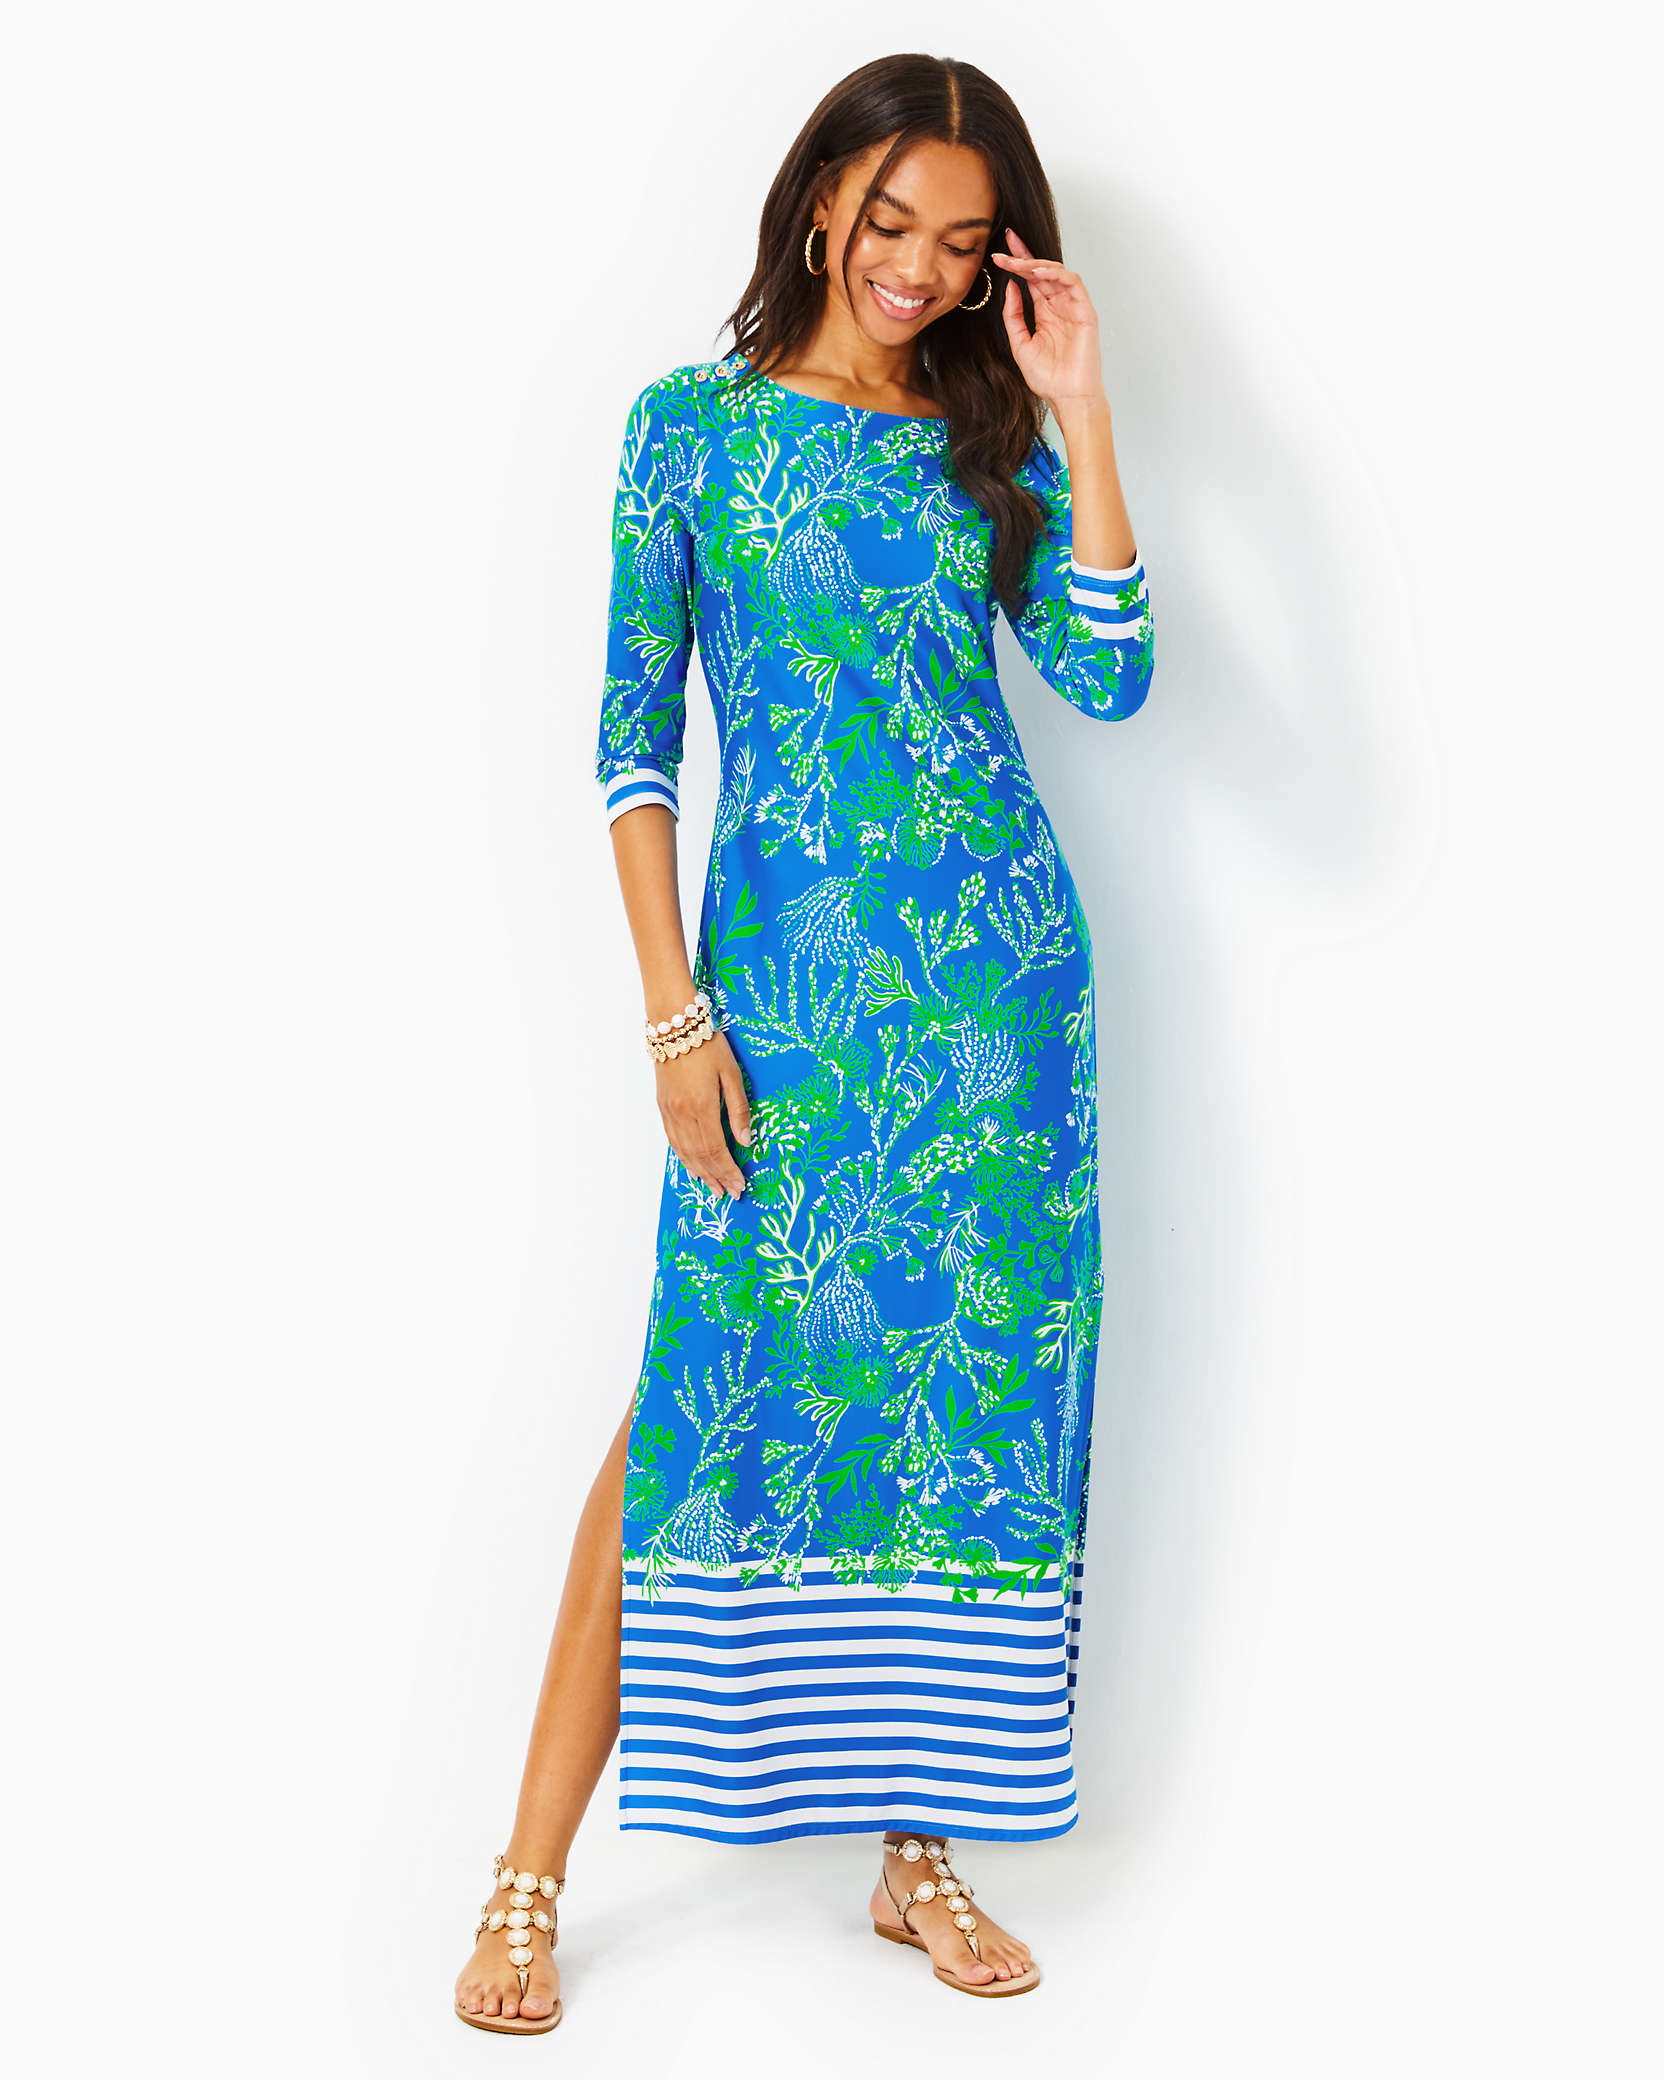 Shop Lilly Pulitzer Upf 50+ Chillylilly Seralina Maxi Dress In Briny Blue A Bit Salty Engineered Chillylilly